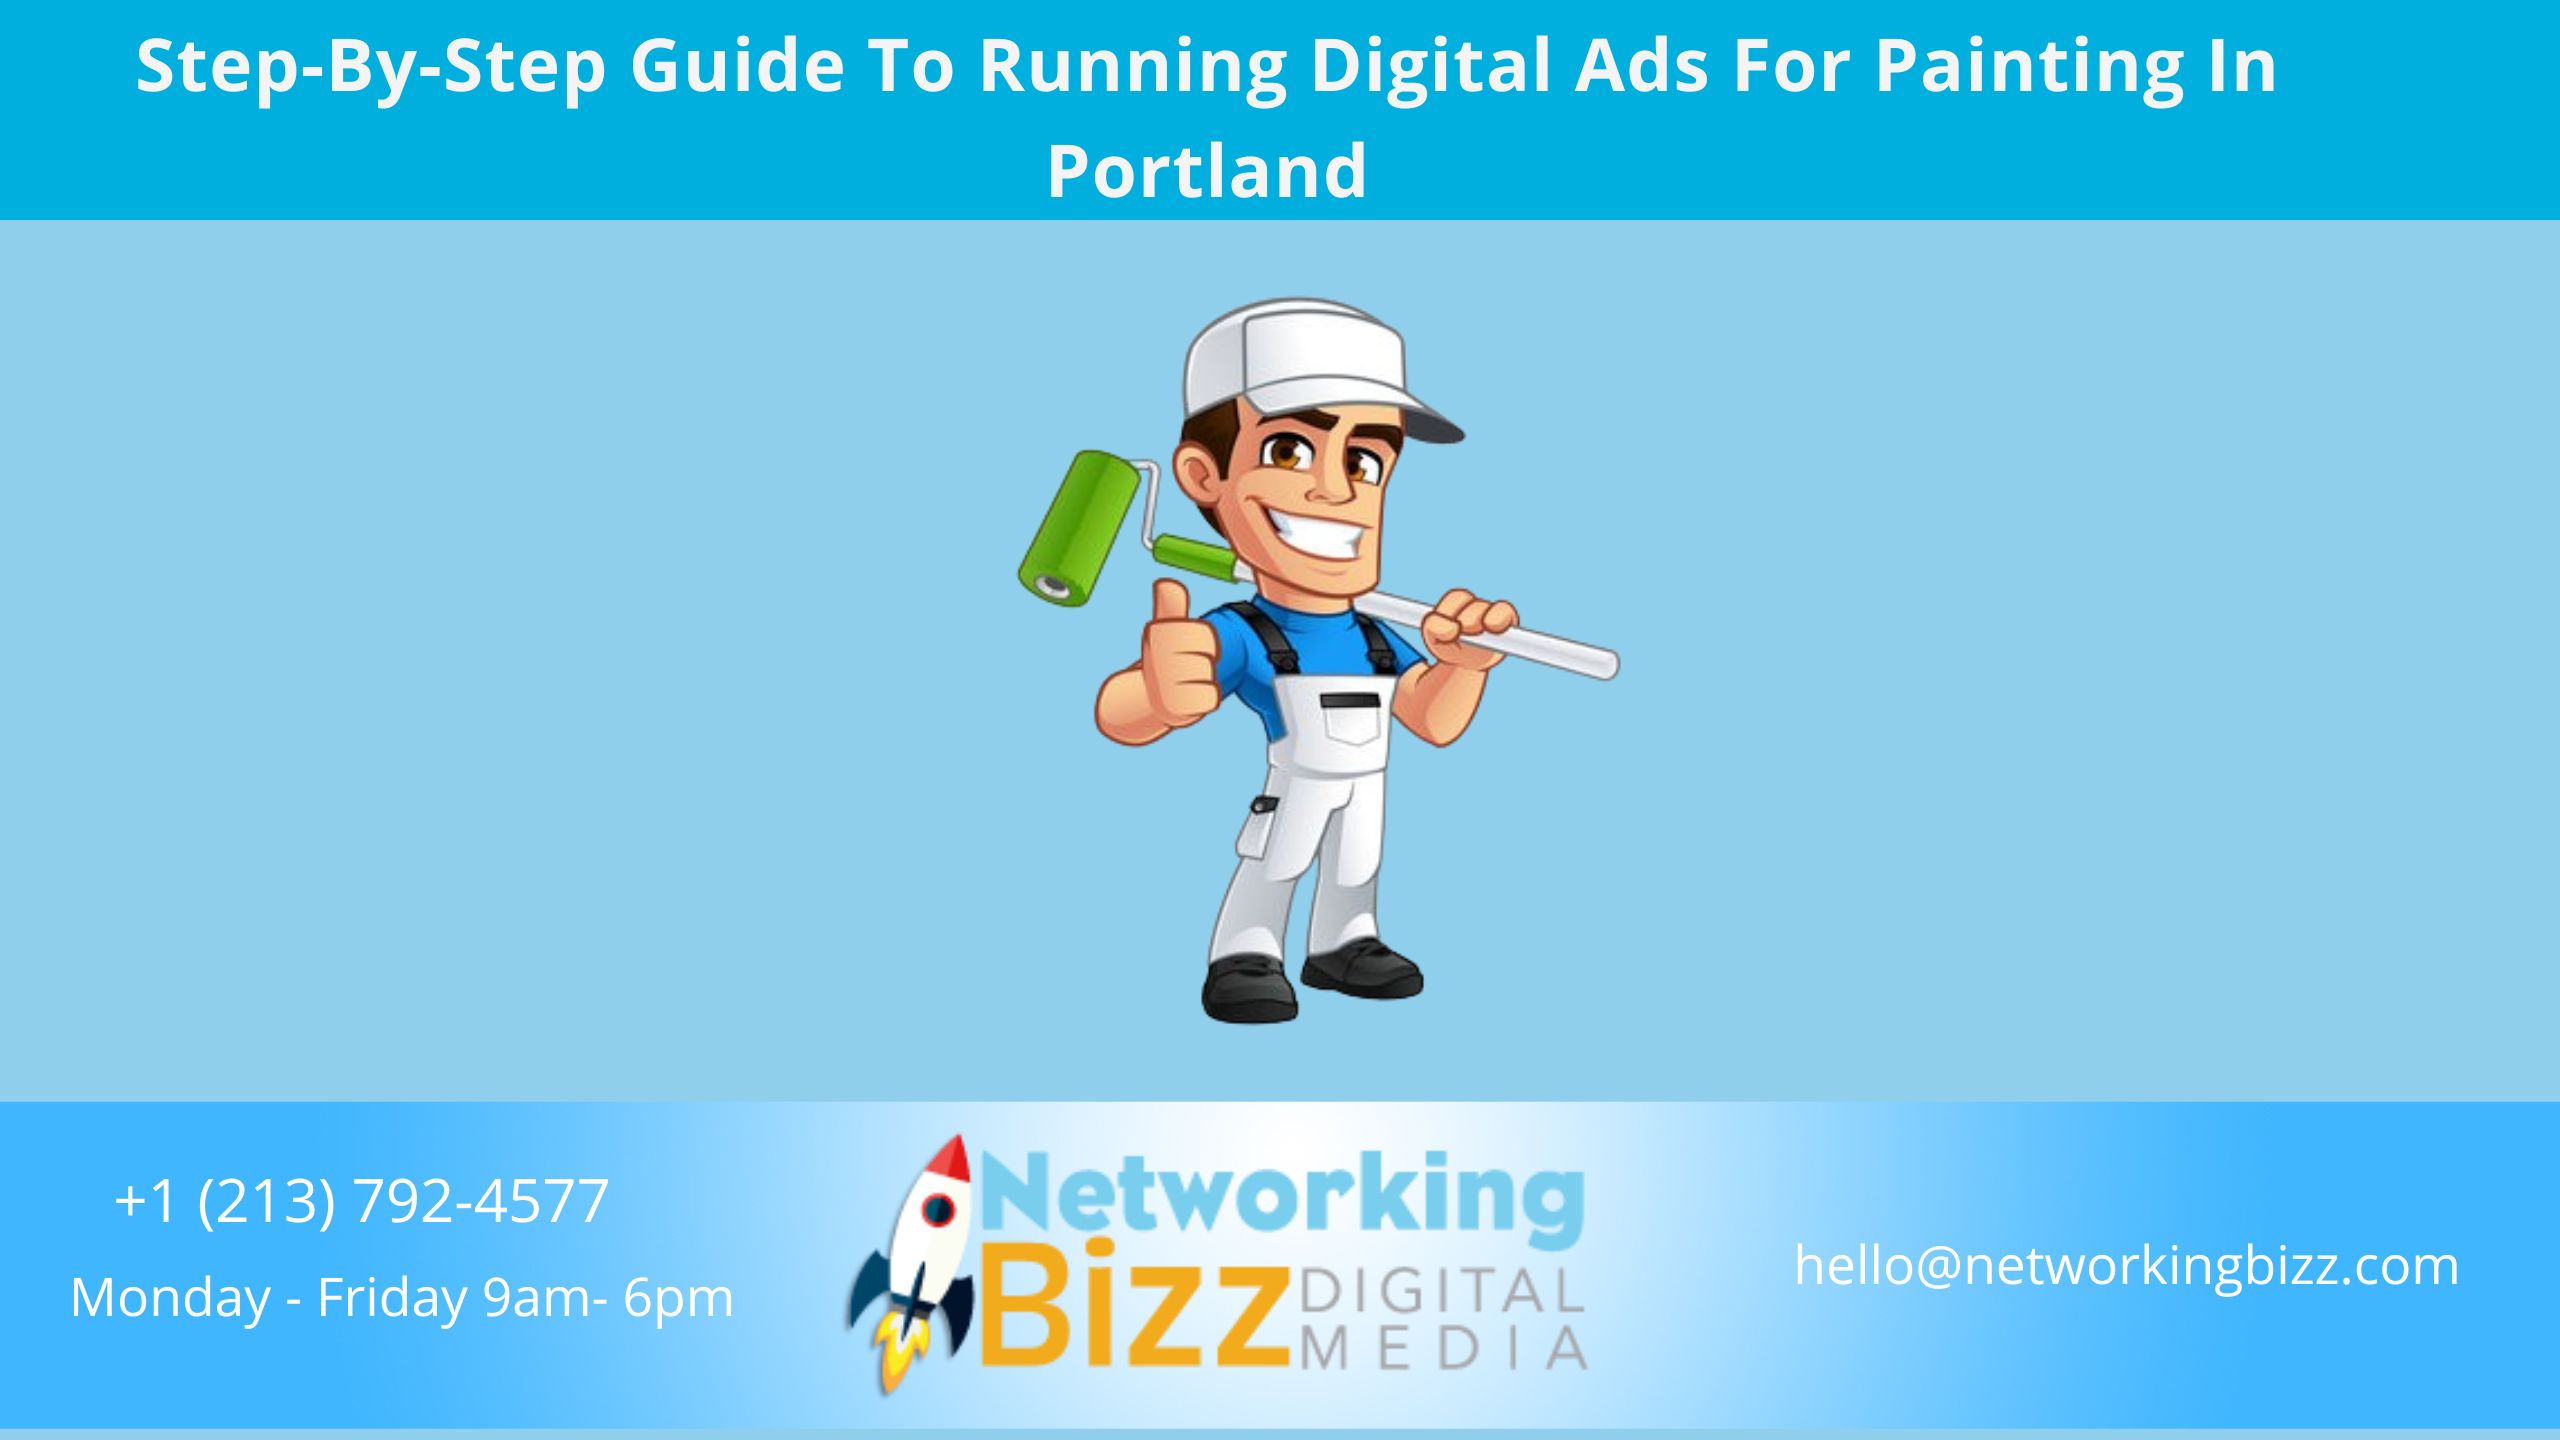 Step-By-Step Guide To Running Digital Ads For Painting In Portland